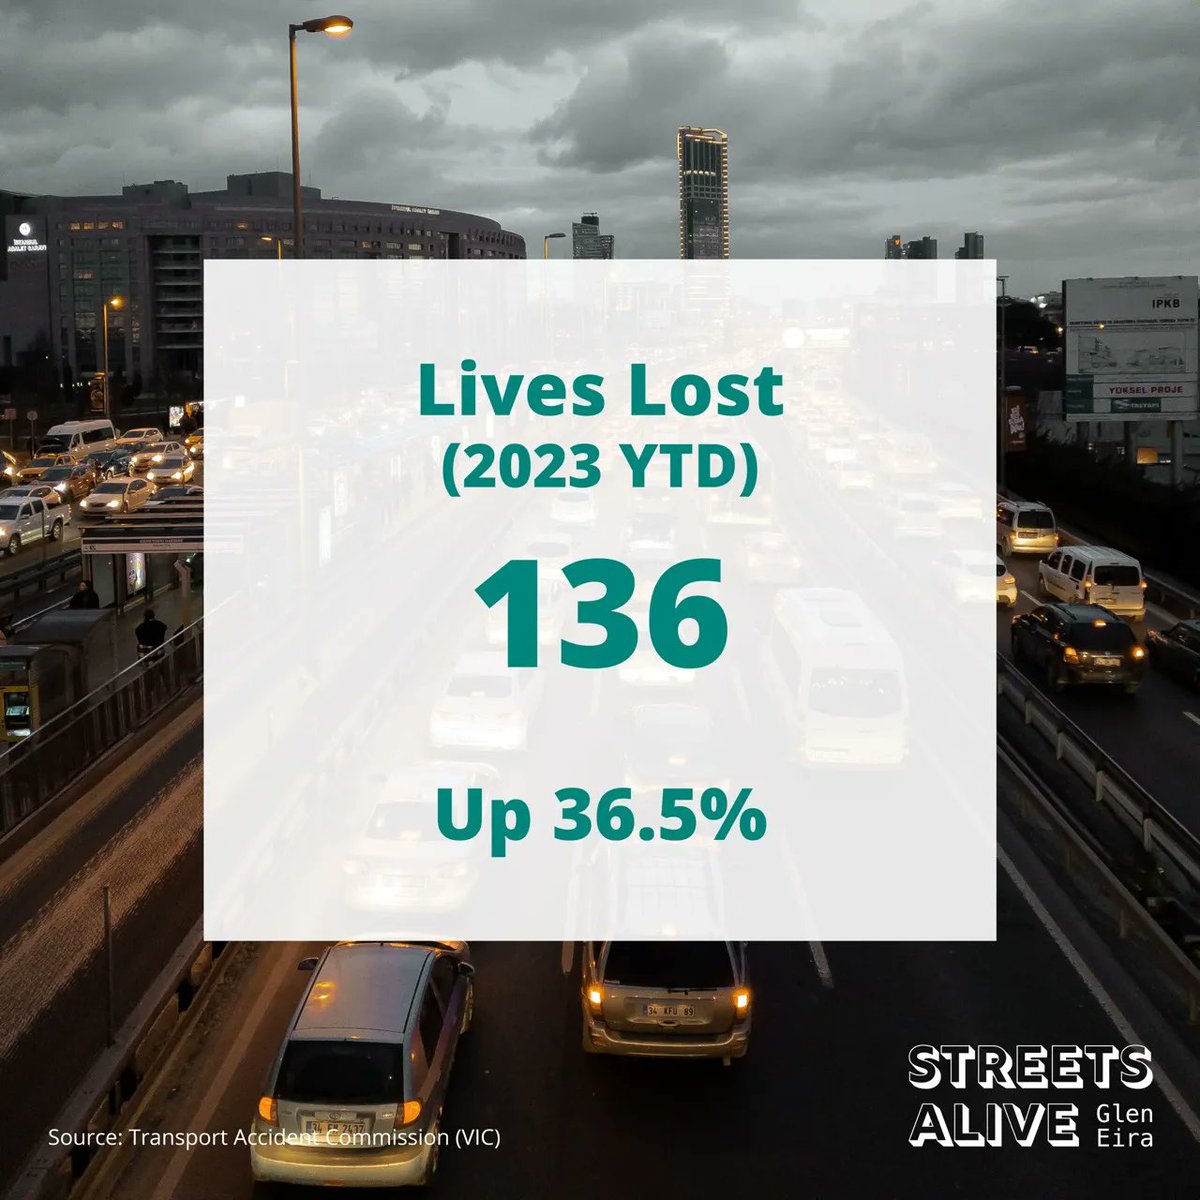 The loss of 131 lives this year, is devastating. We cannot stand idly by. It's time for urgent action, stronger enforcement, and improved infrastructure to ensure the safety of all road users. Let's demand change for a safer future! #RoadSafetyMatters #TogetherForSafety #Victoria